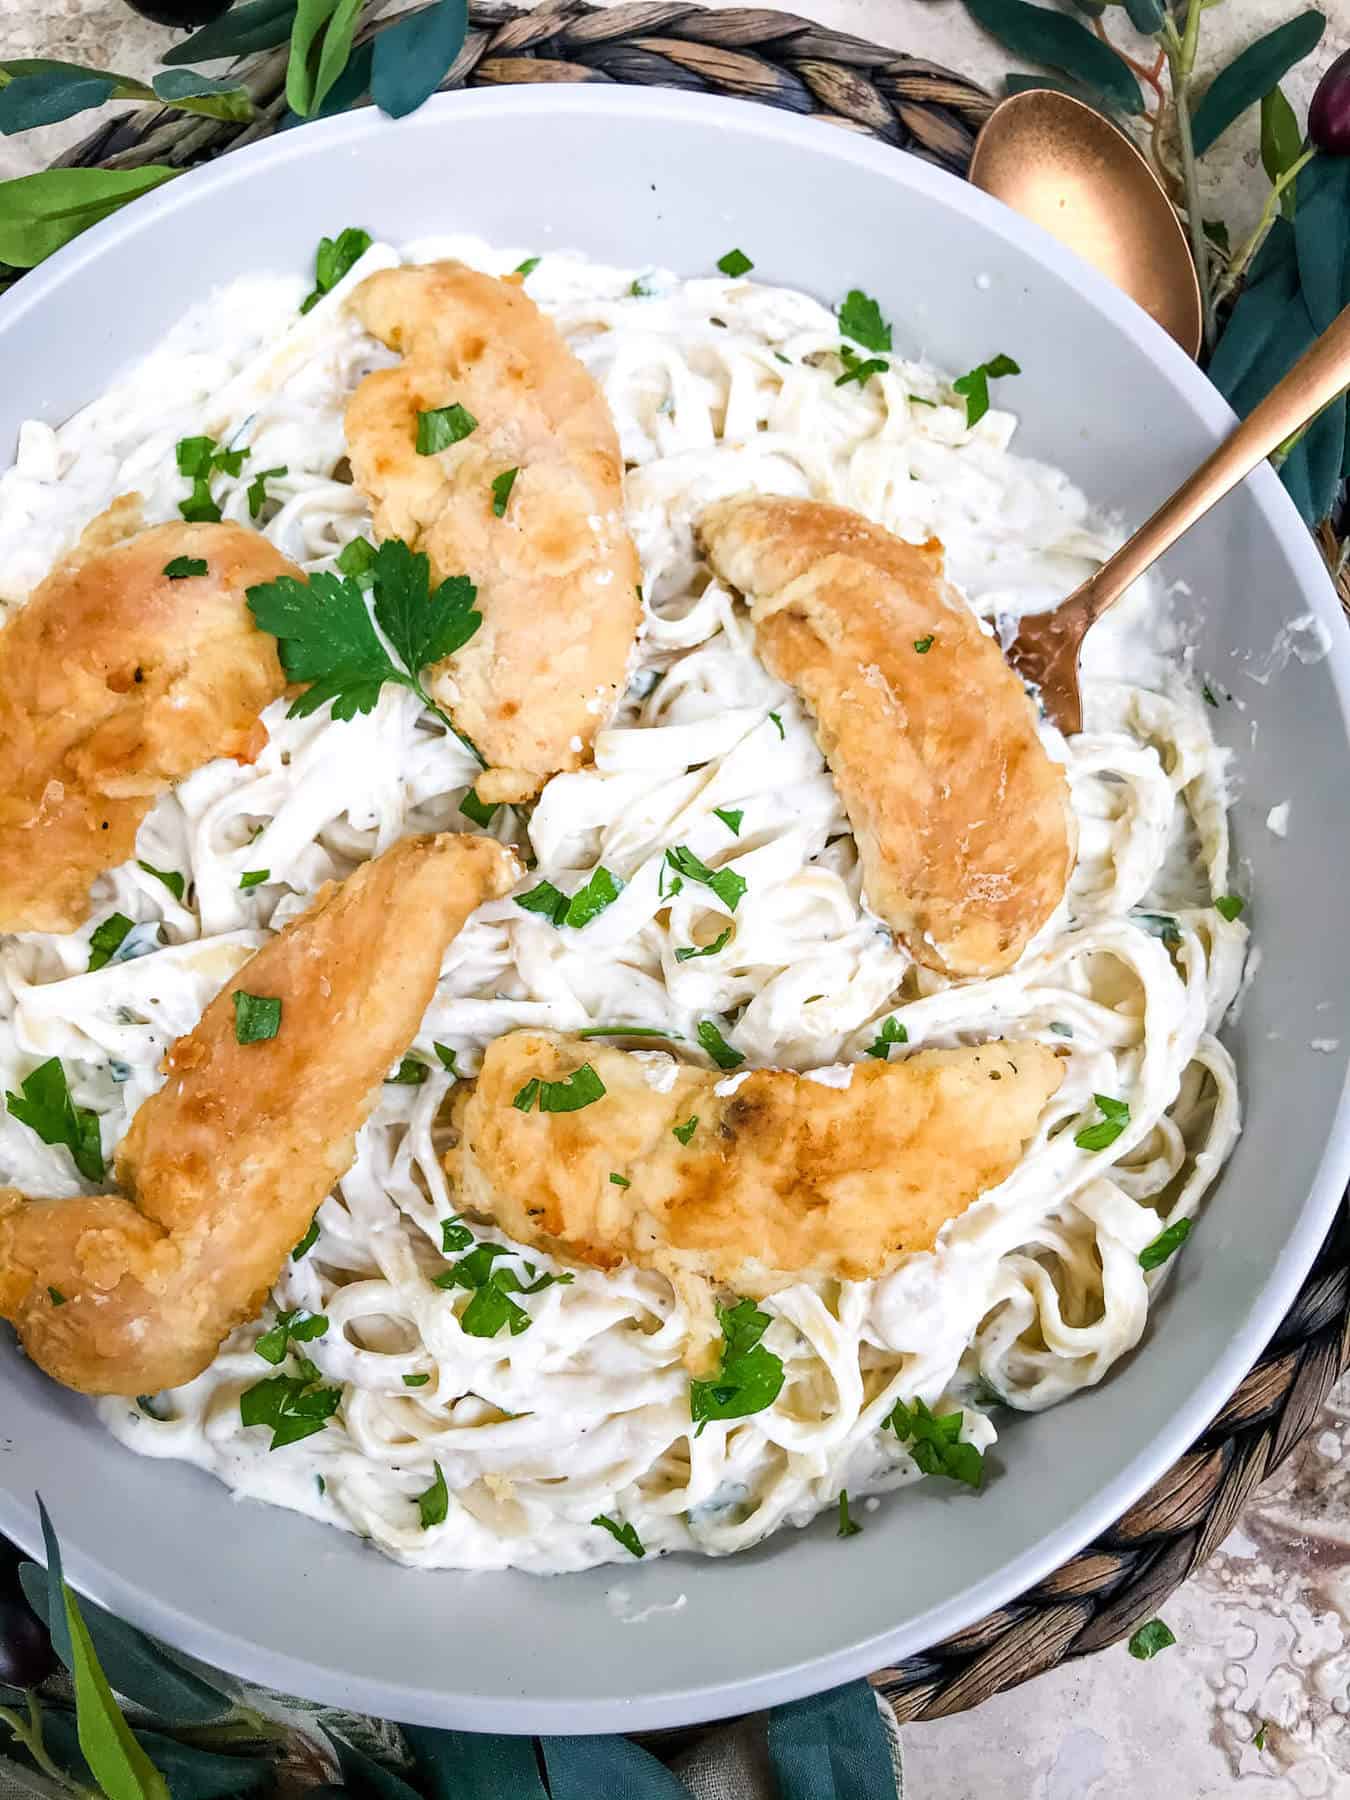 A dish full of Copycat Olive Garden Chicken Fettuccine Alfredo from the top view